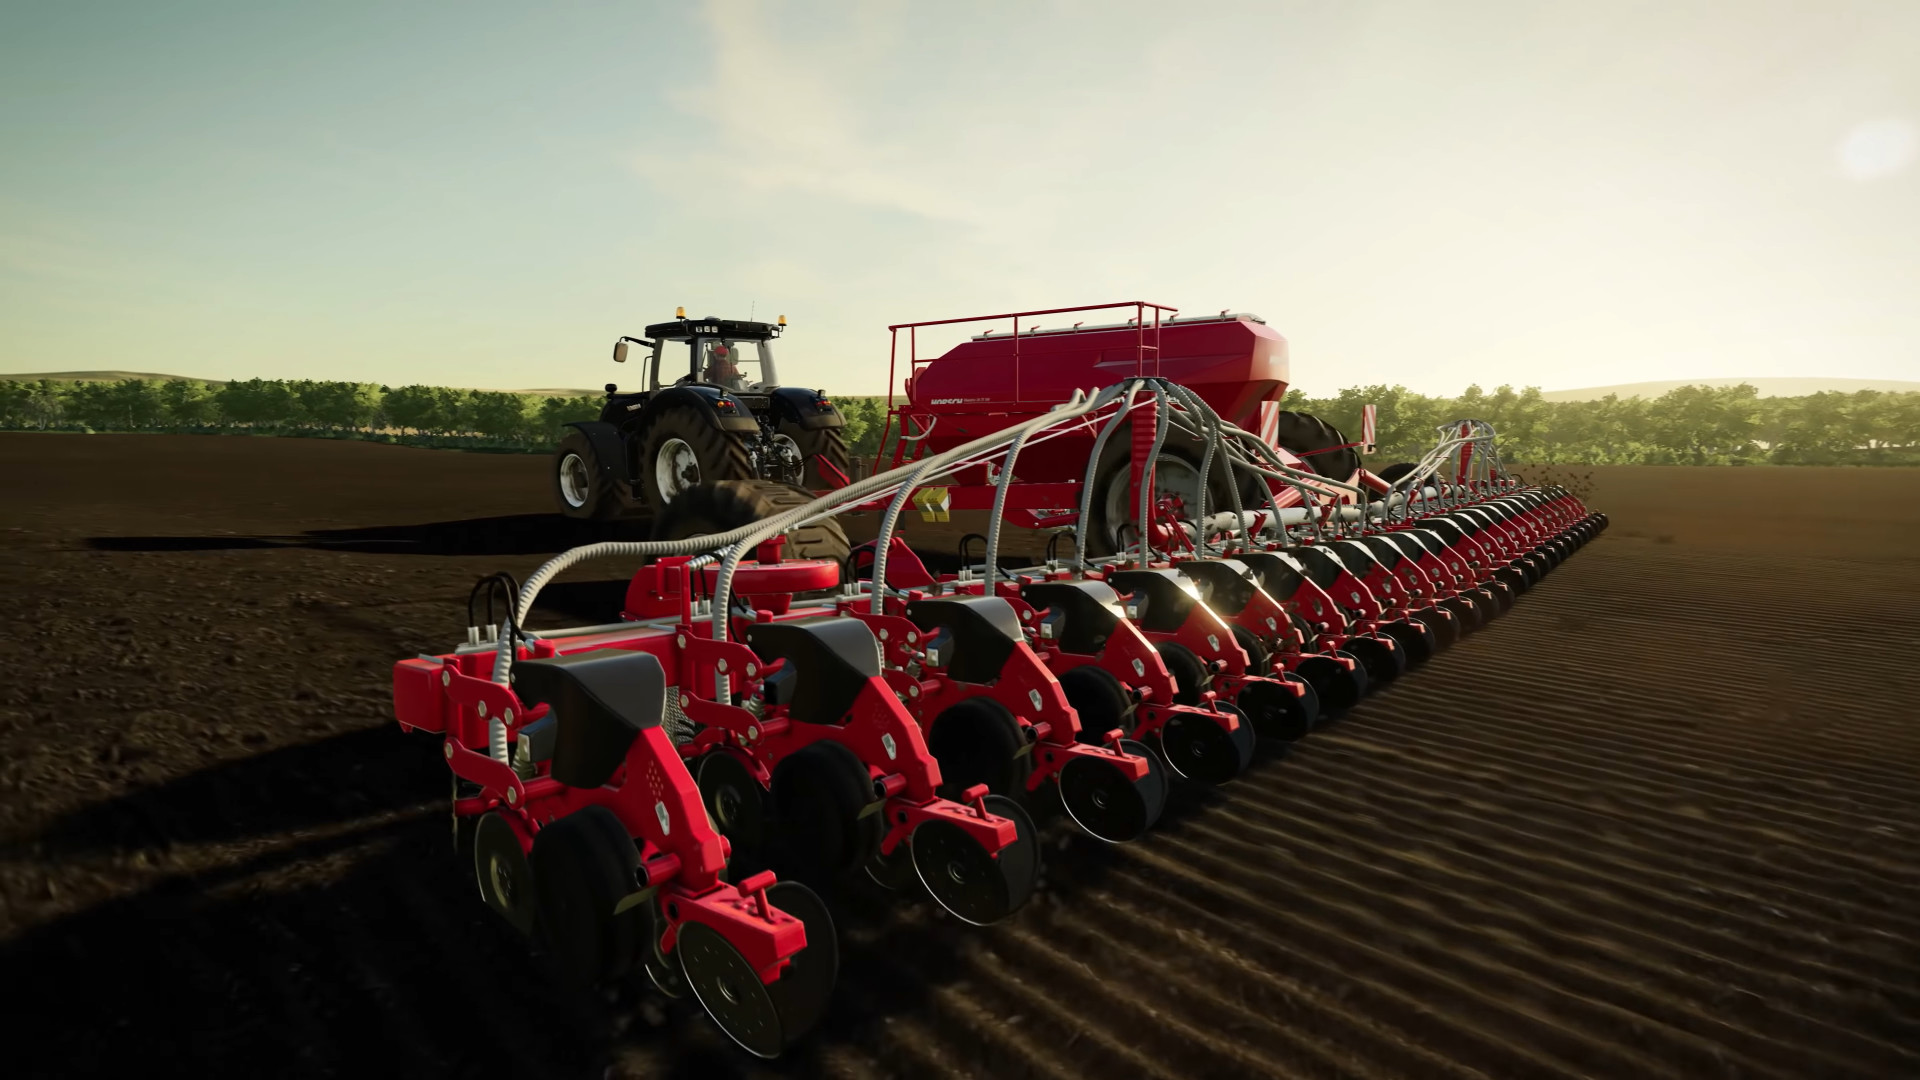 How To Reset Vehicle in Farming Simulator 22